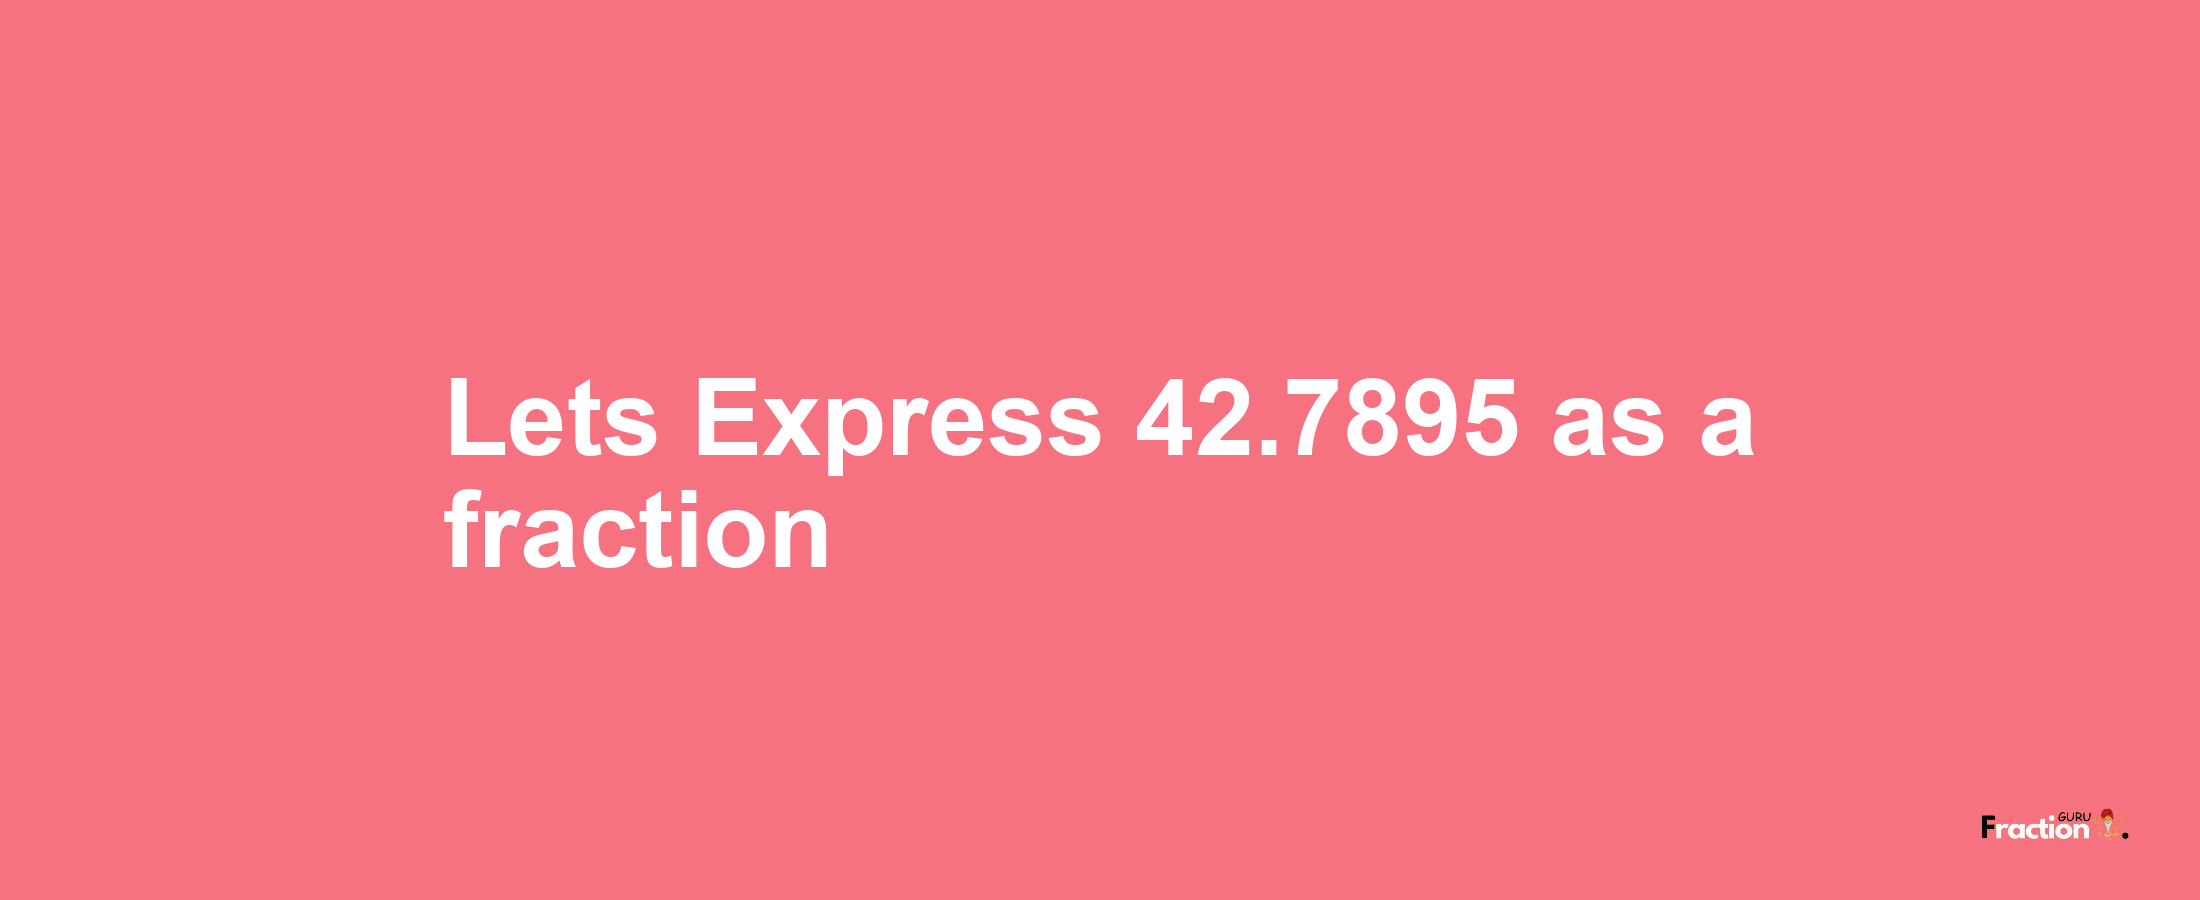 Lets Express 42.7895 as afraction